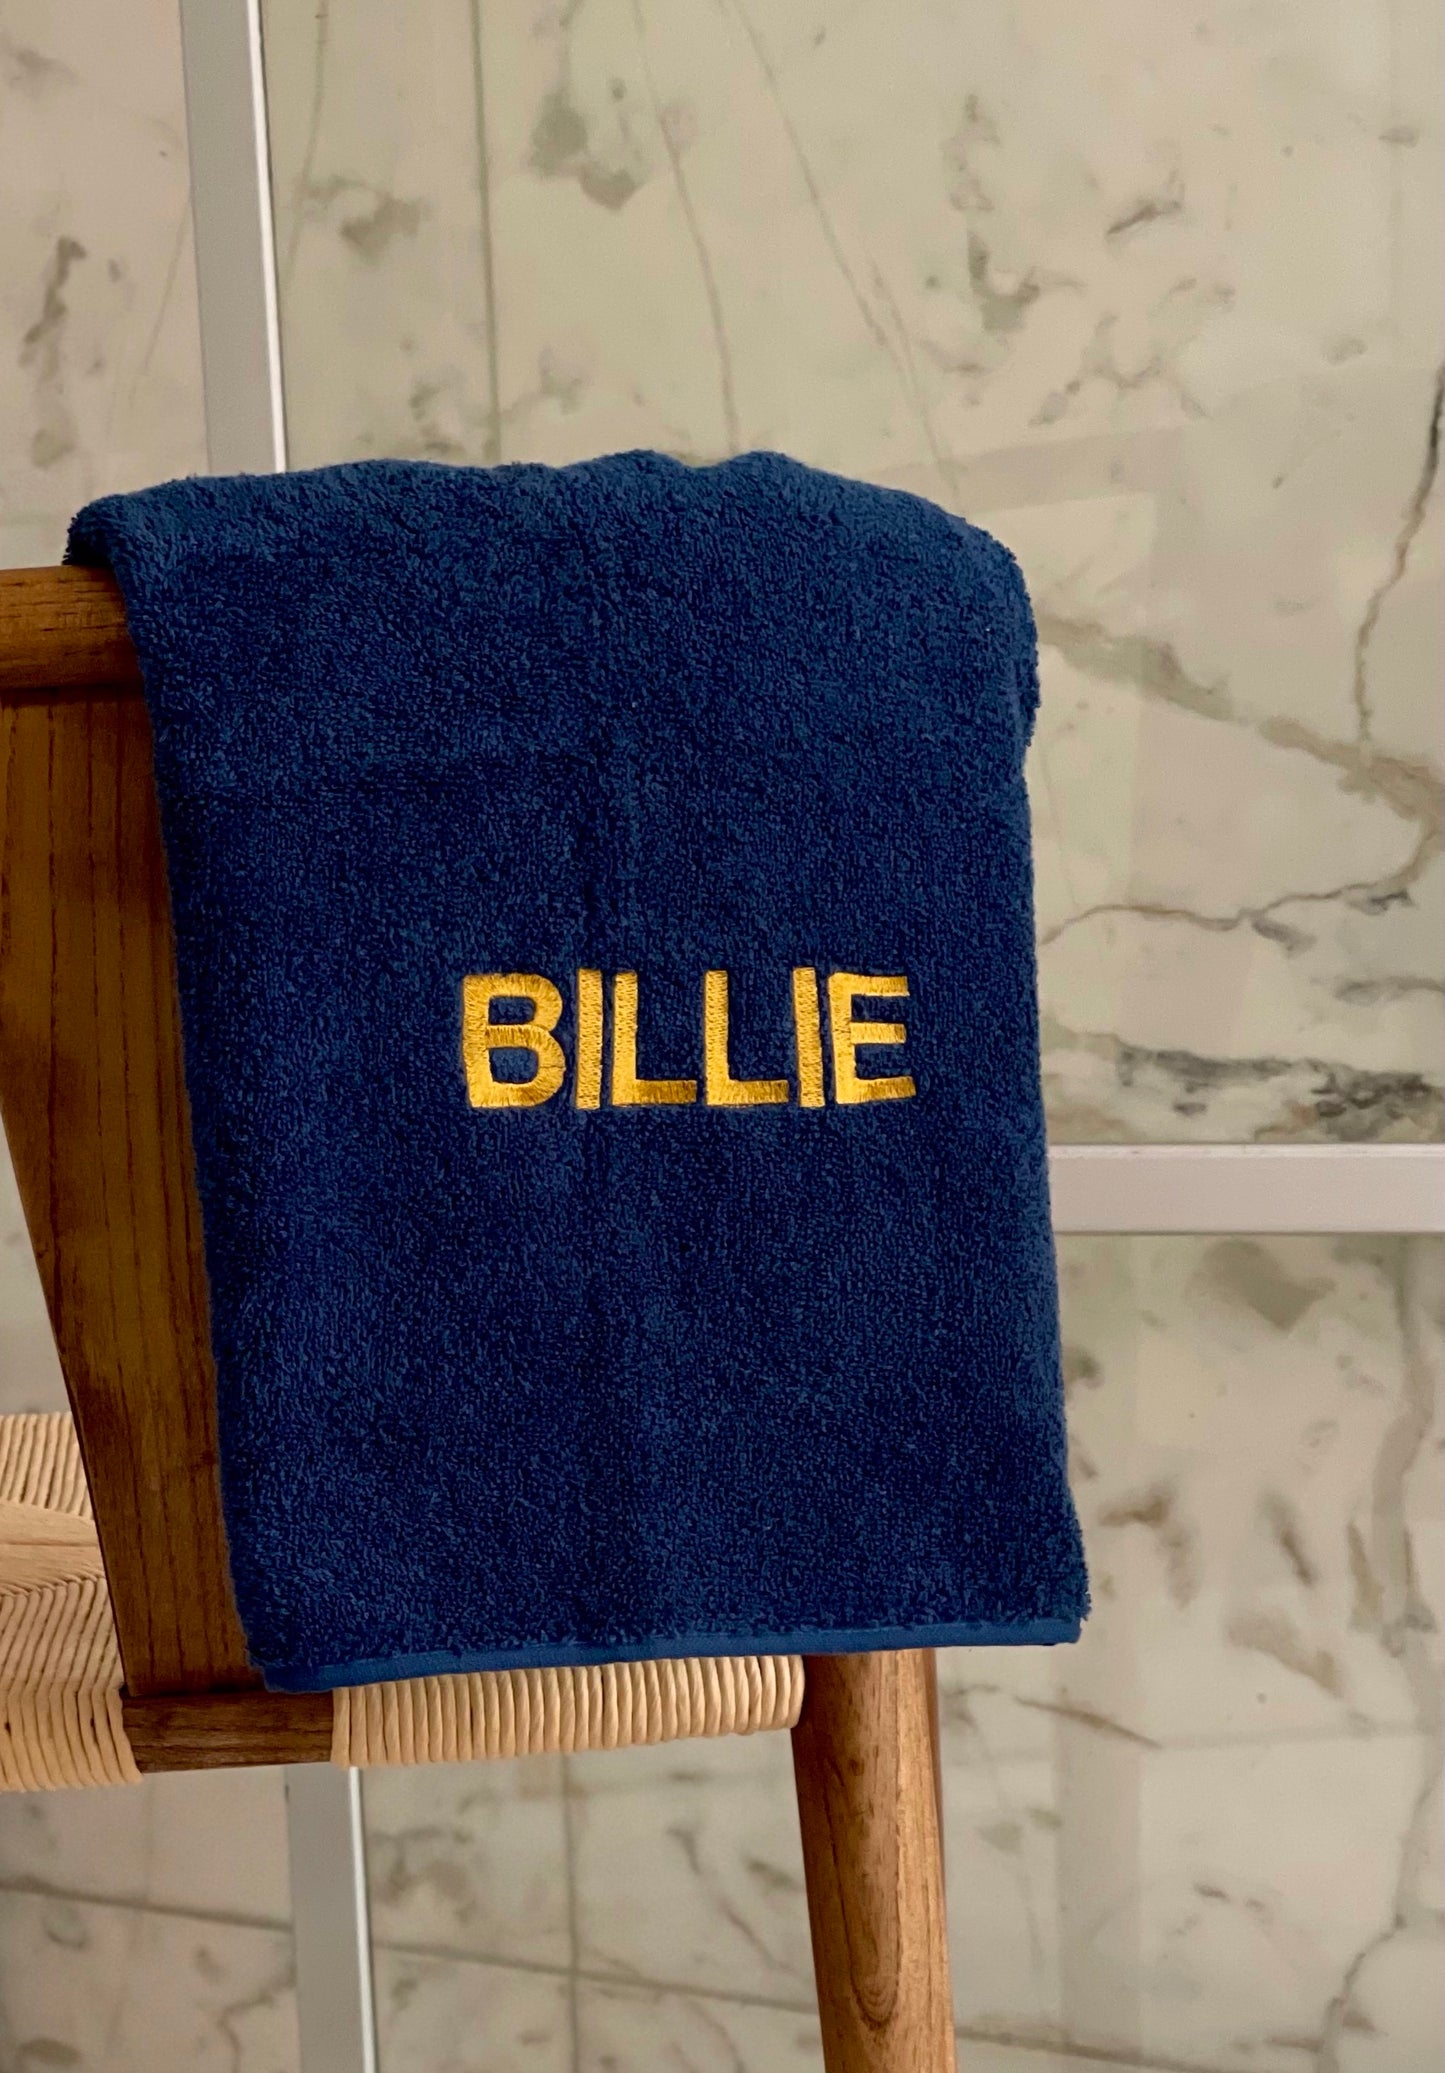 Night Blue towel with name